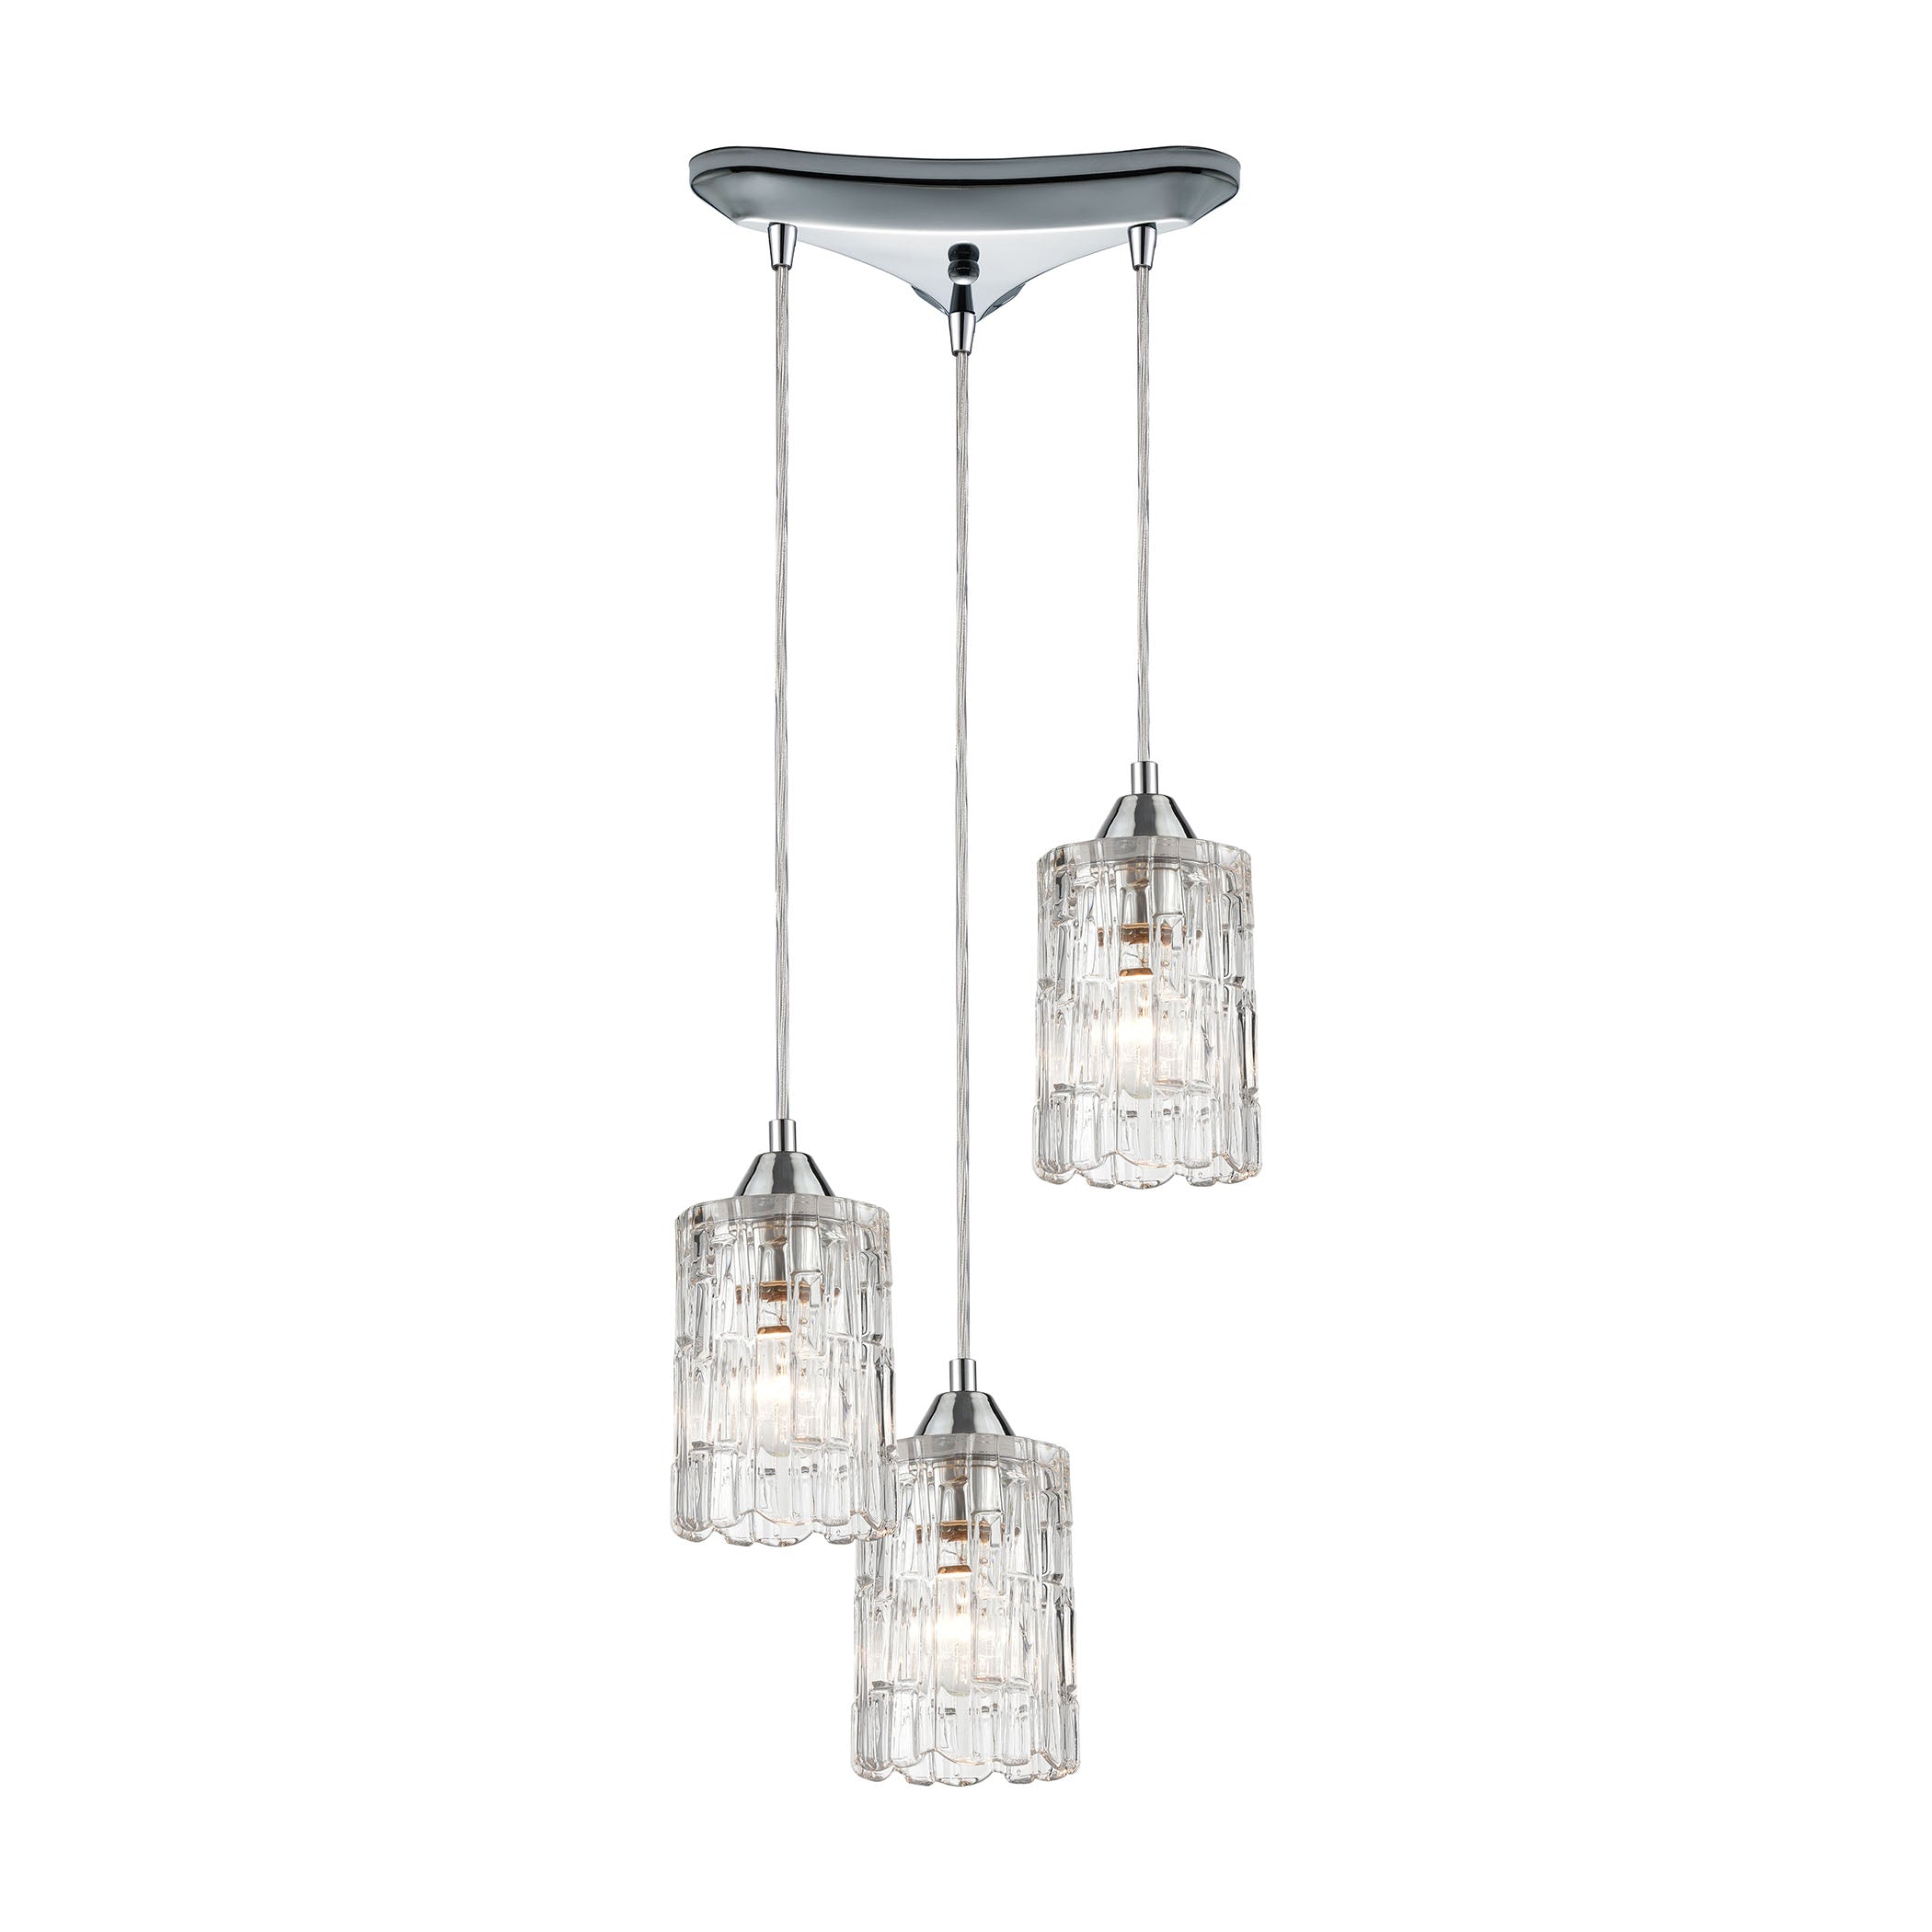 ELK Lighting 17414/3 Ezra 3-Light Triangular Mini Pendant Fixture in Polished Chrome with Textured Clear Crystal